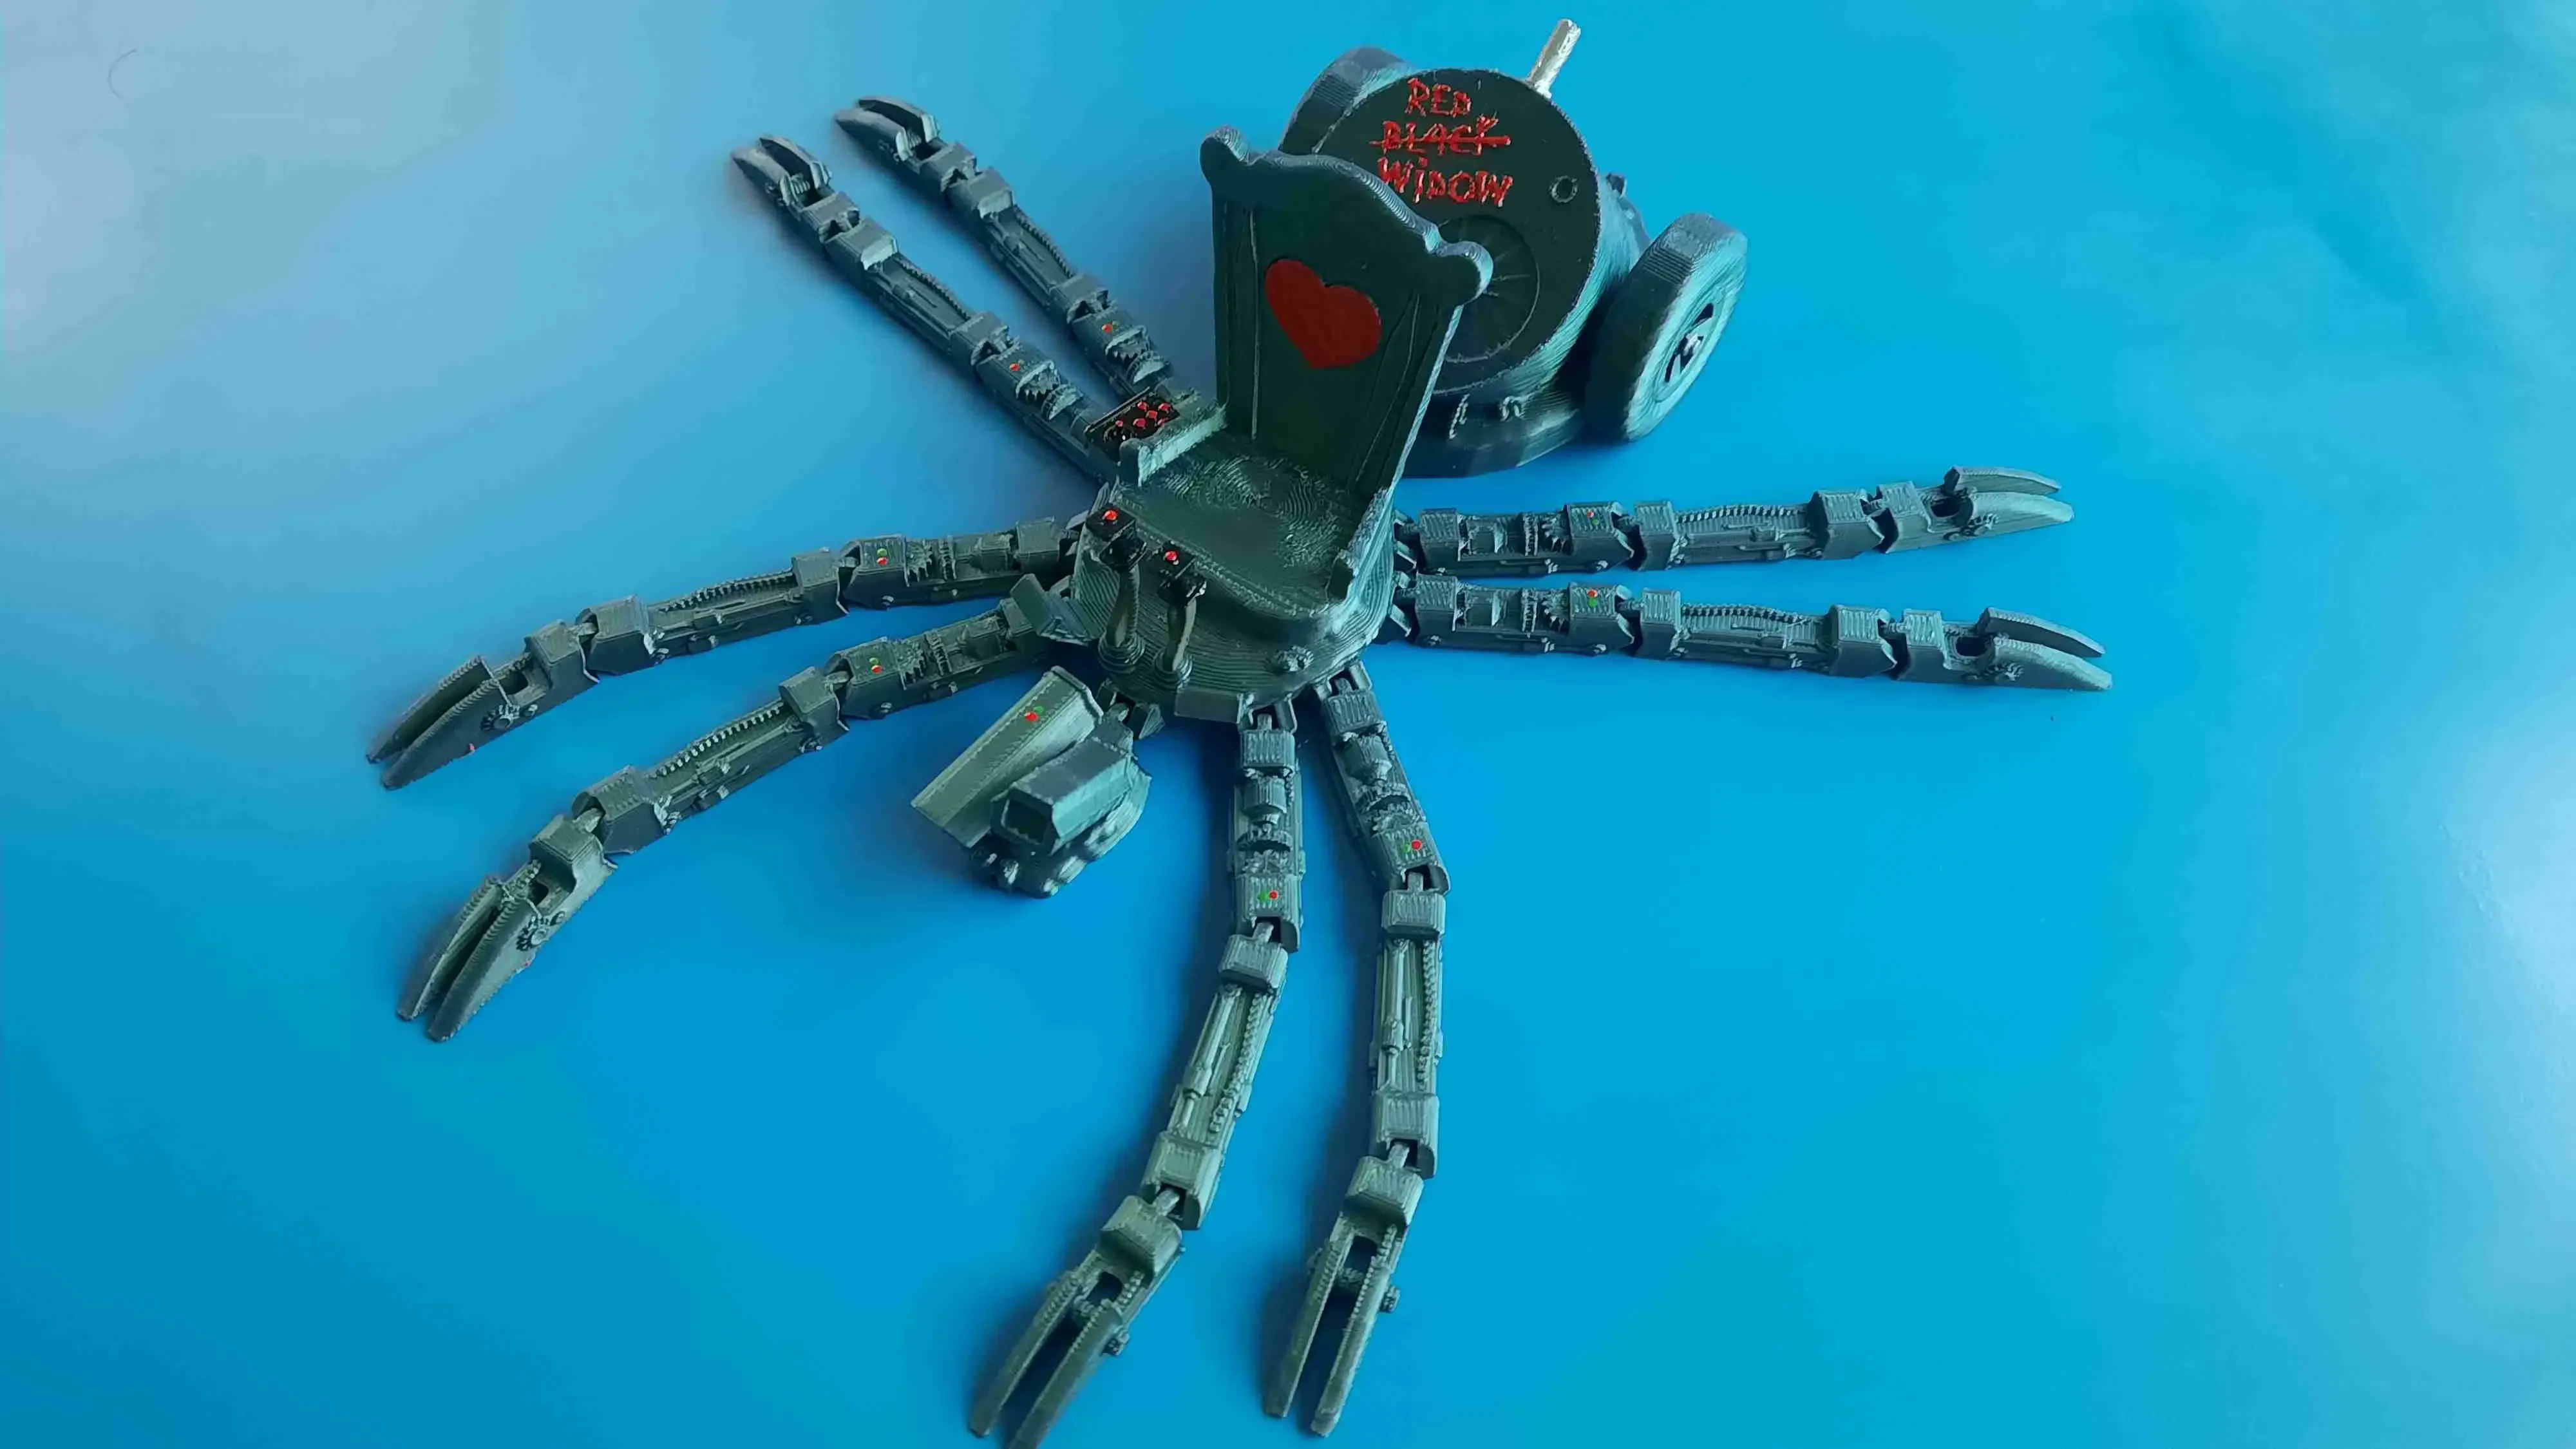 The Great Mech Spidey